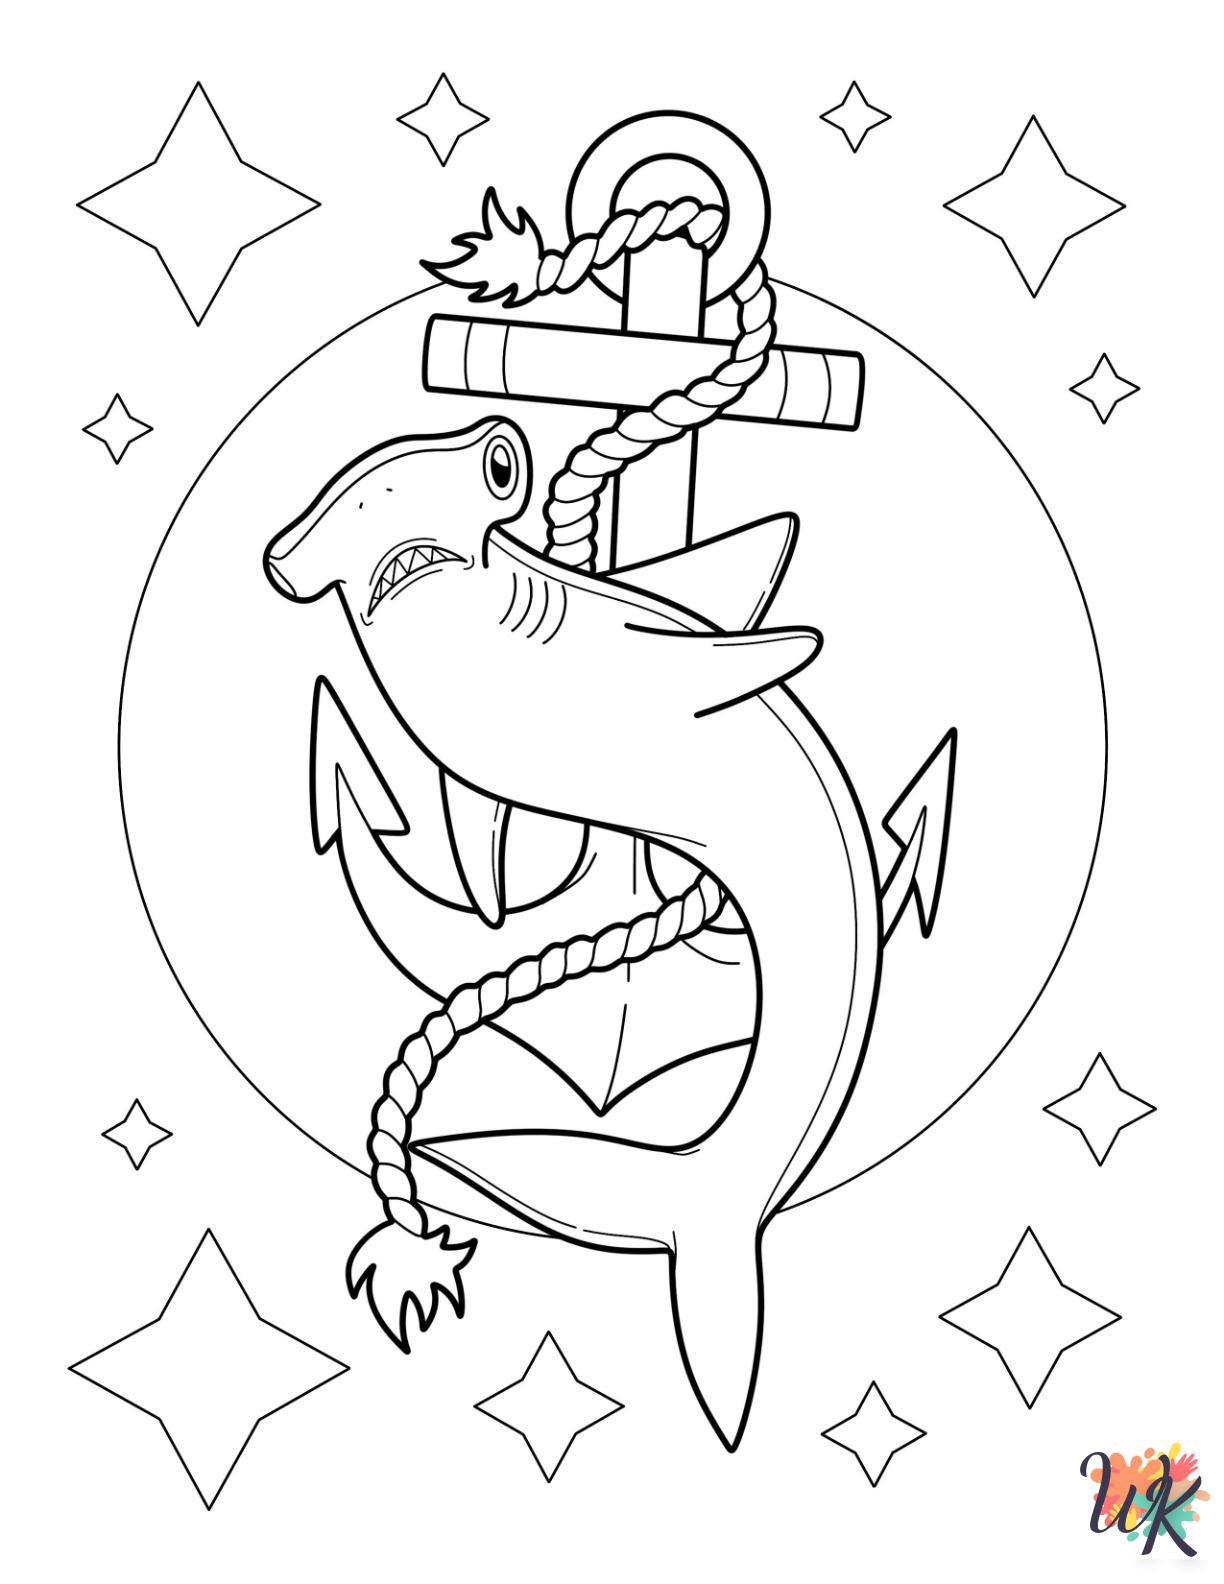 Hammerhead Shark ornament coloring pages 1